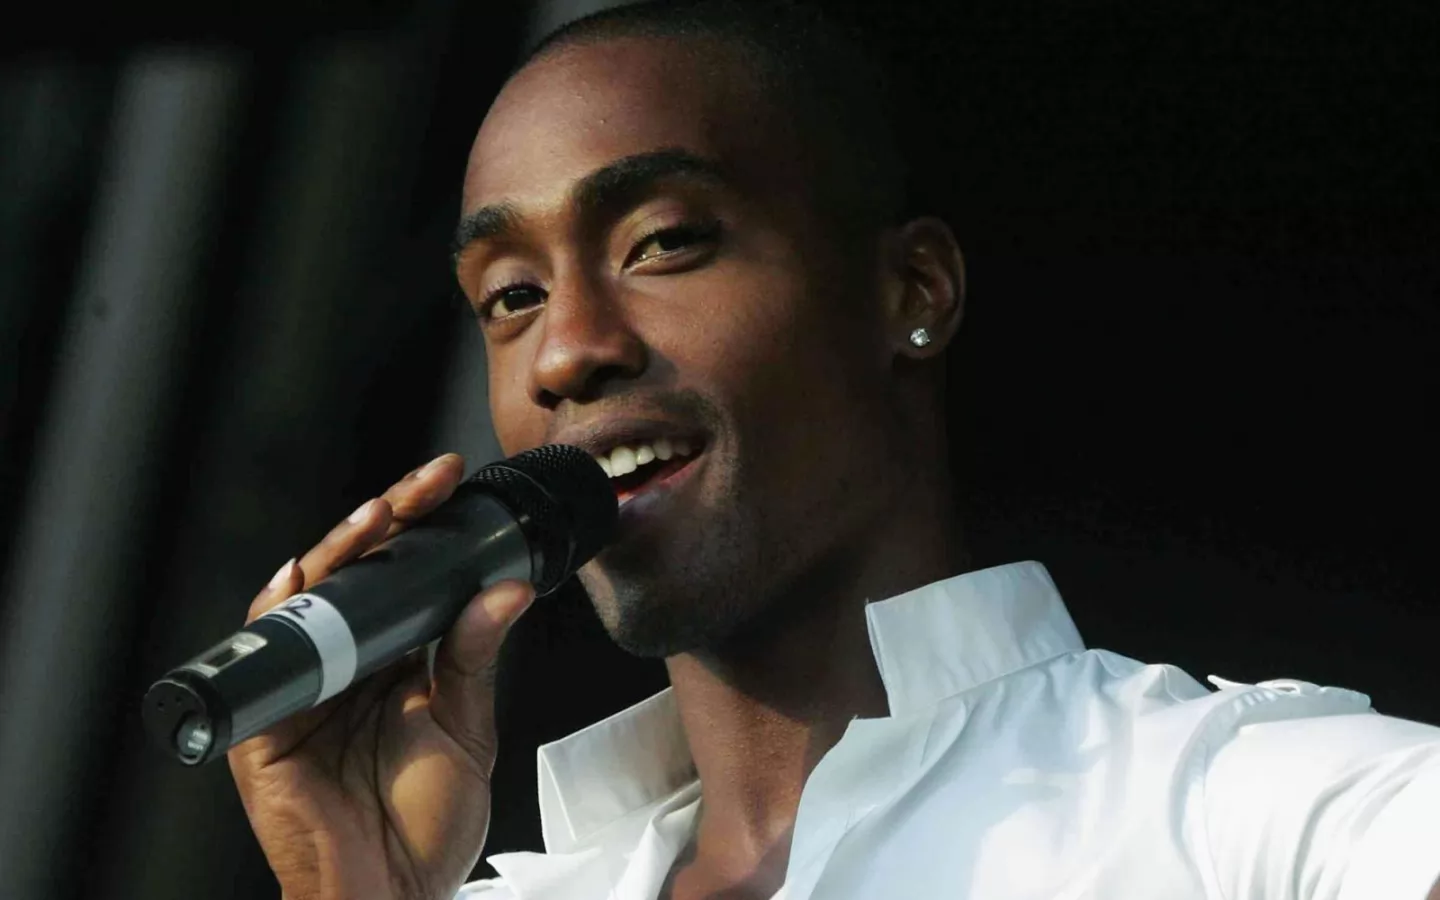 Simon Webbe with a microphone in hands, black, celebrities, men, music x